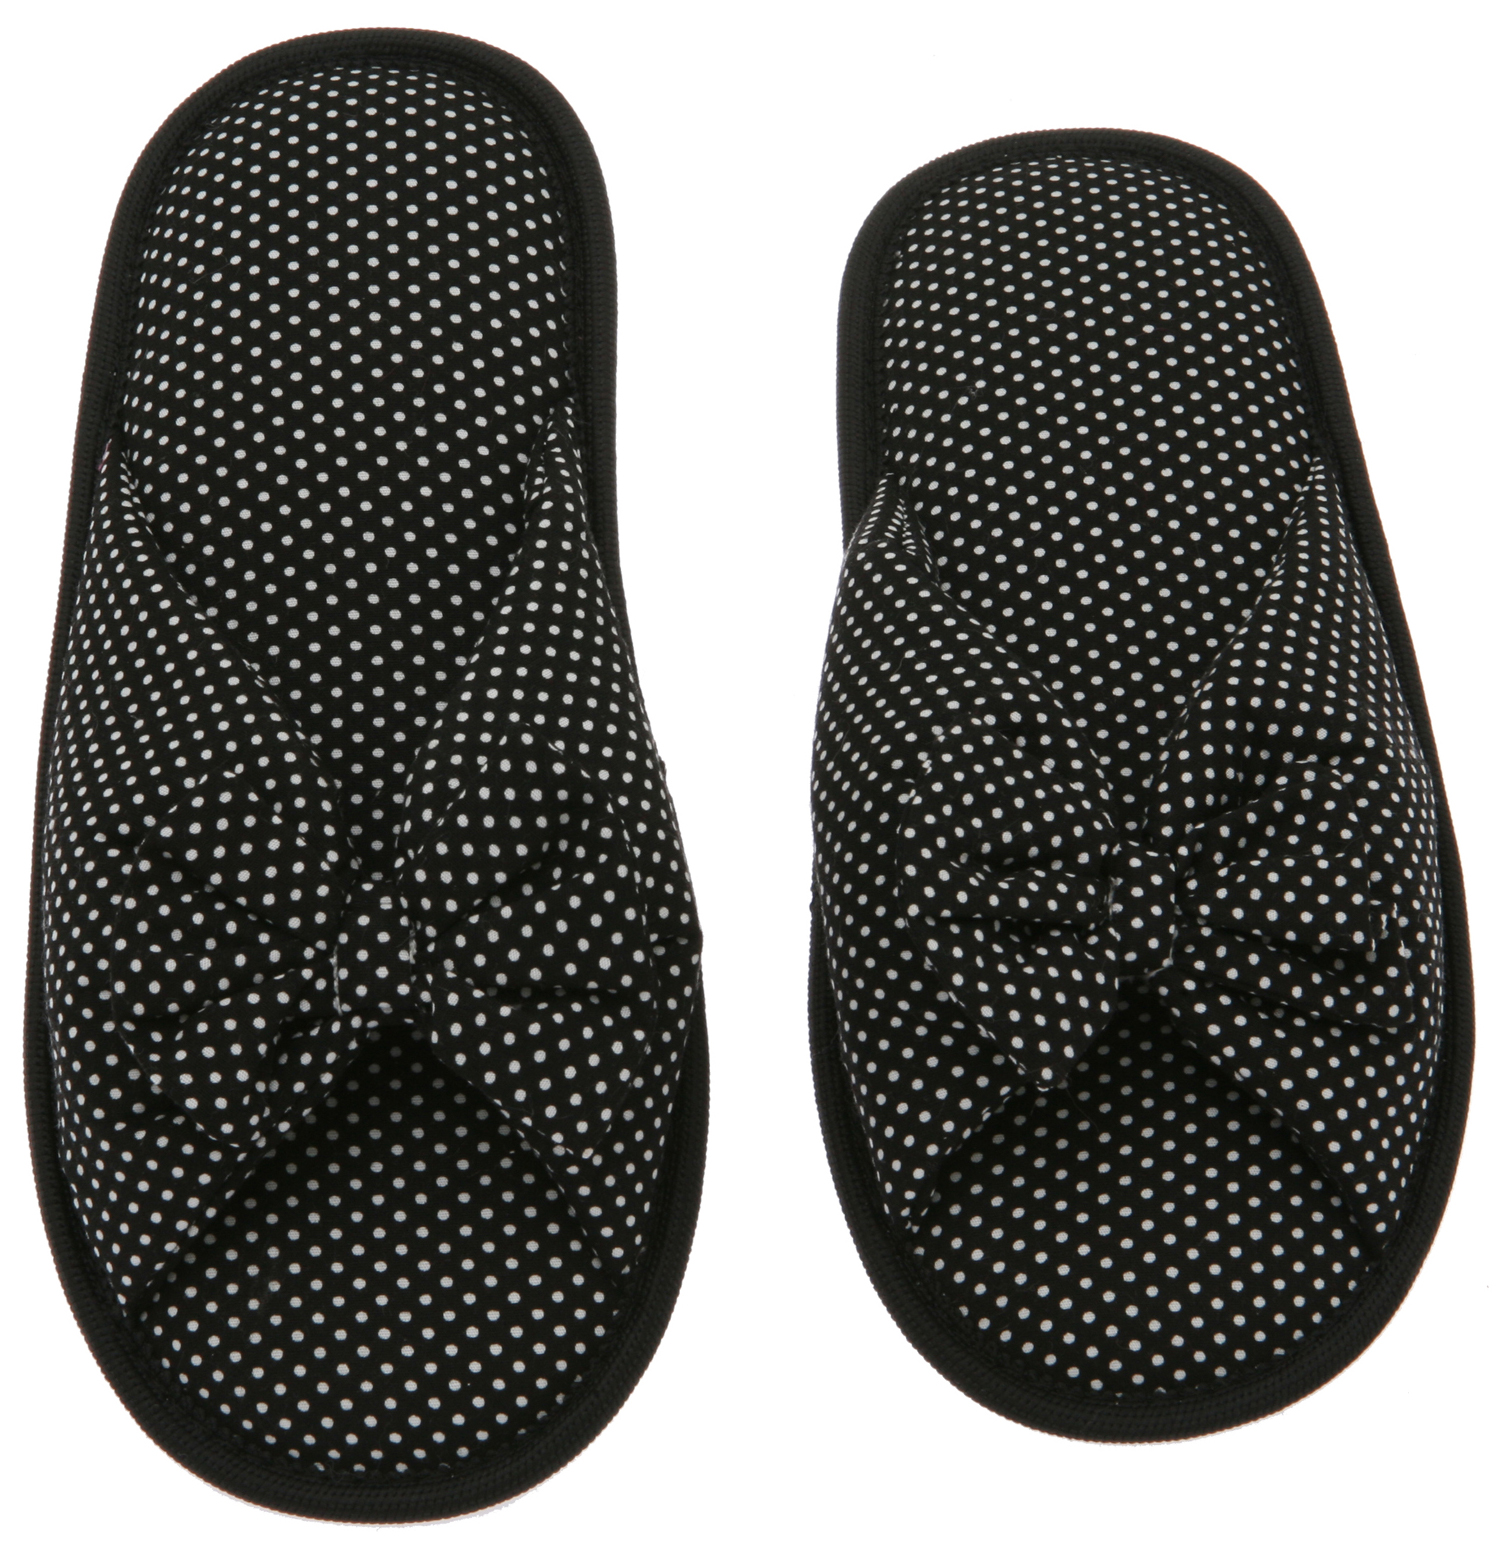 Living Healthy Products Cotton Poka Dot Womens Open Toe Flip-Flops, Size 7-8  - Soft Cute Classic Butterfly Bow Slippers - Black